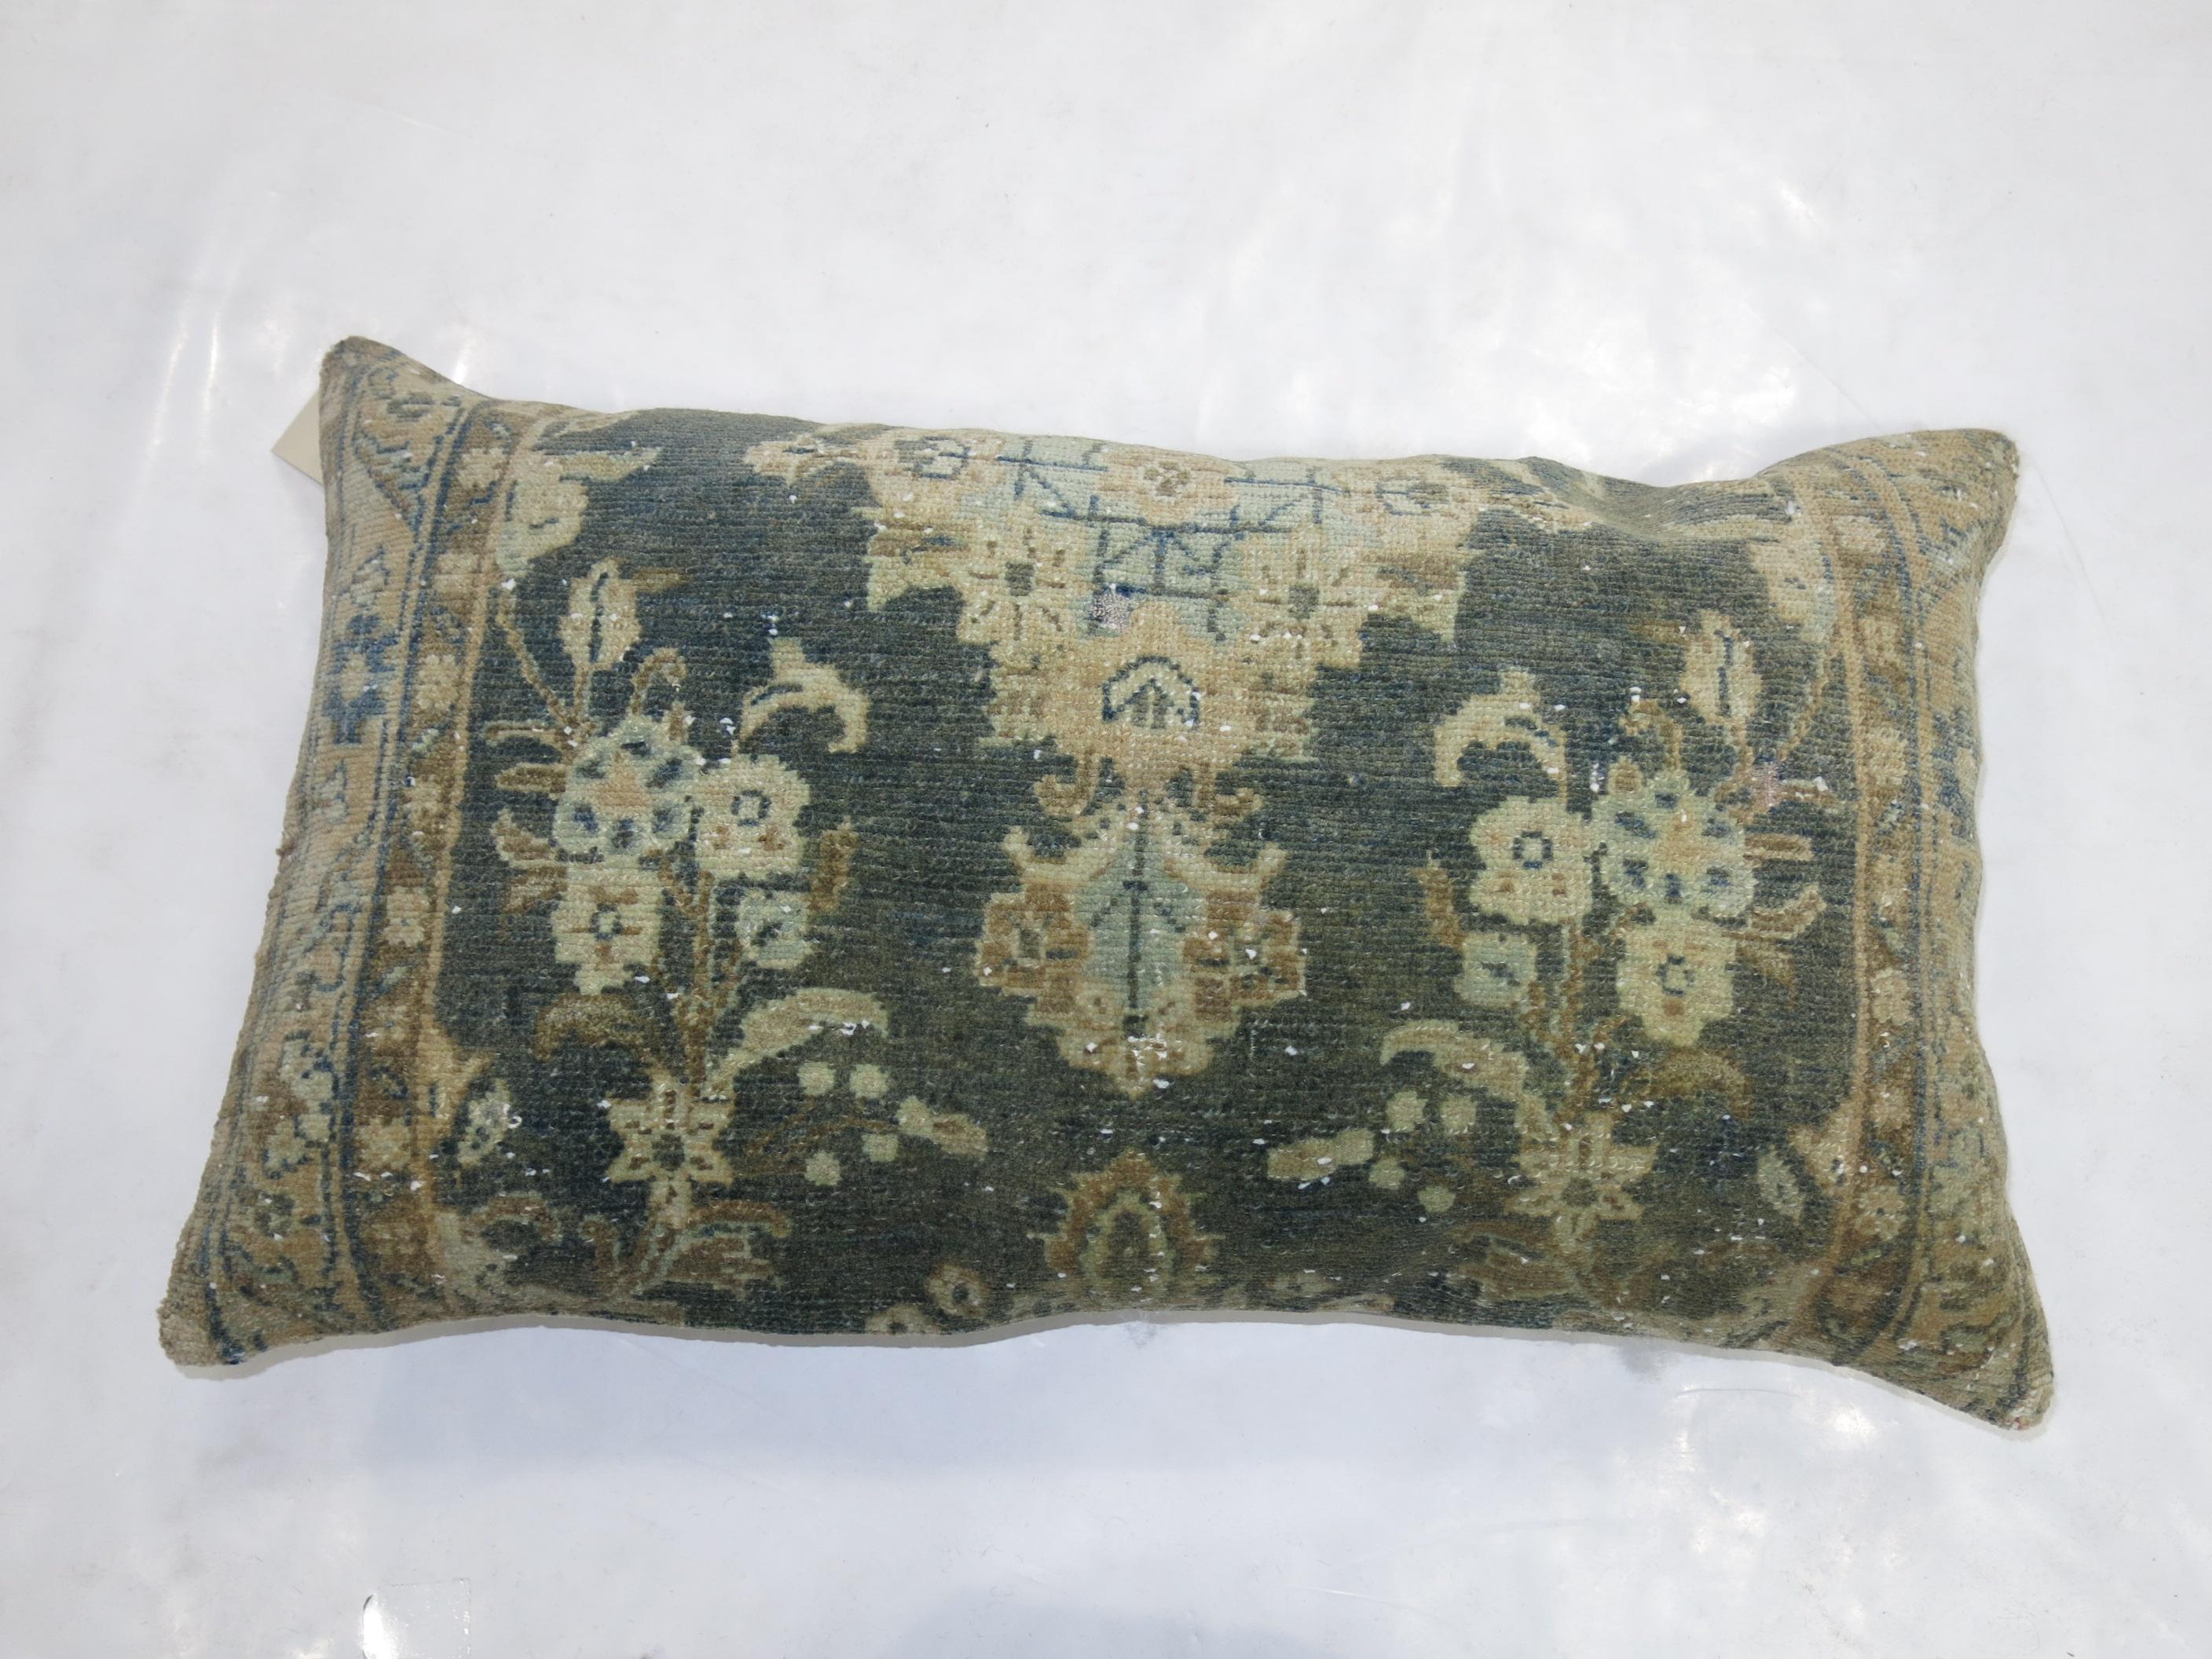 Large floor size pillow made from a green colored 19th century antique green color Persian rug. Zipper closure and foam insert provided.

1'5'' x 2'8''